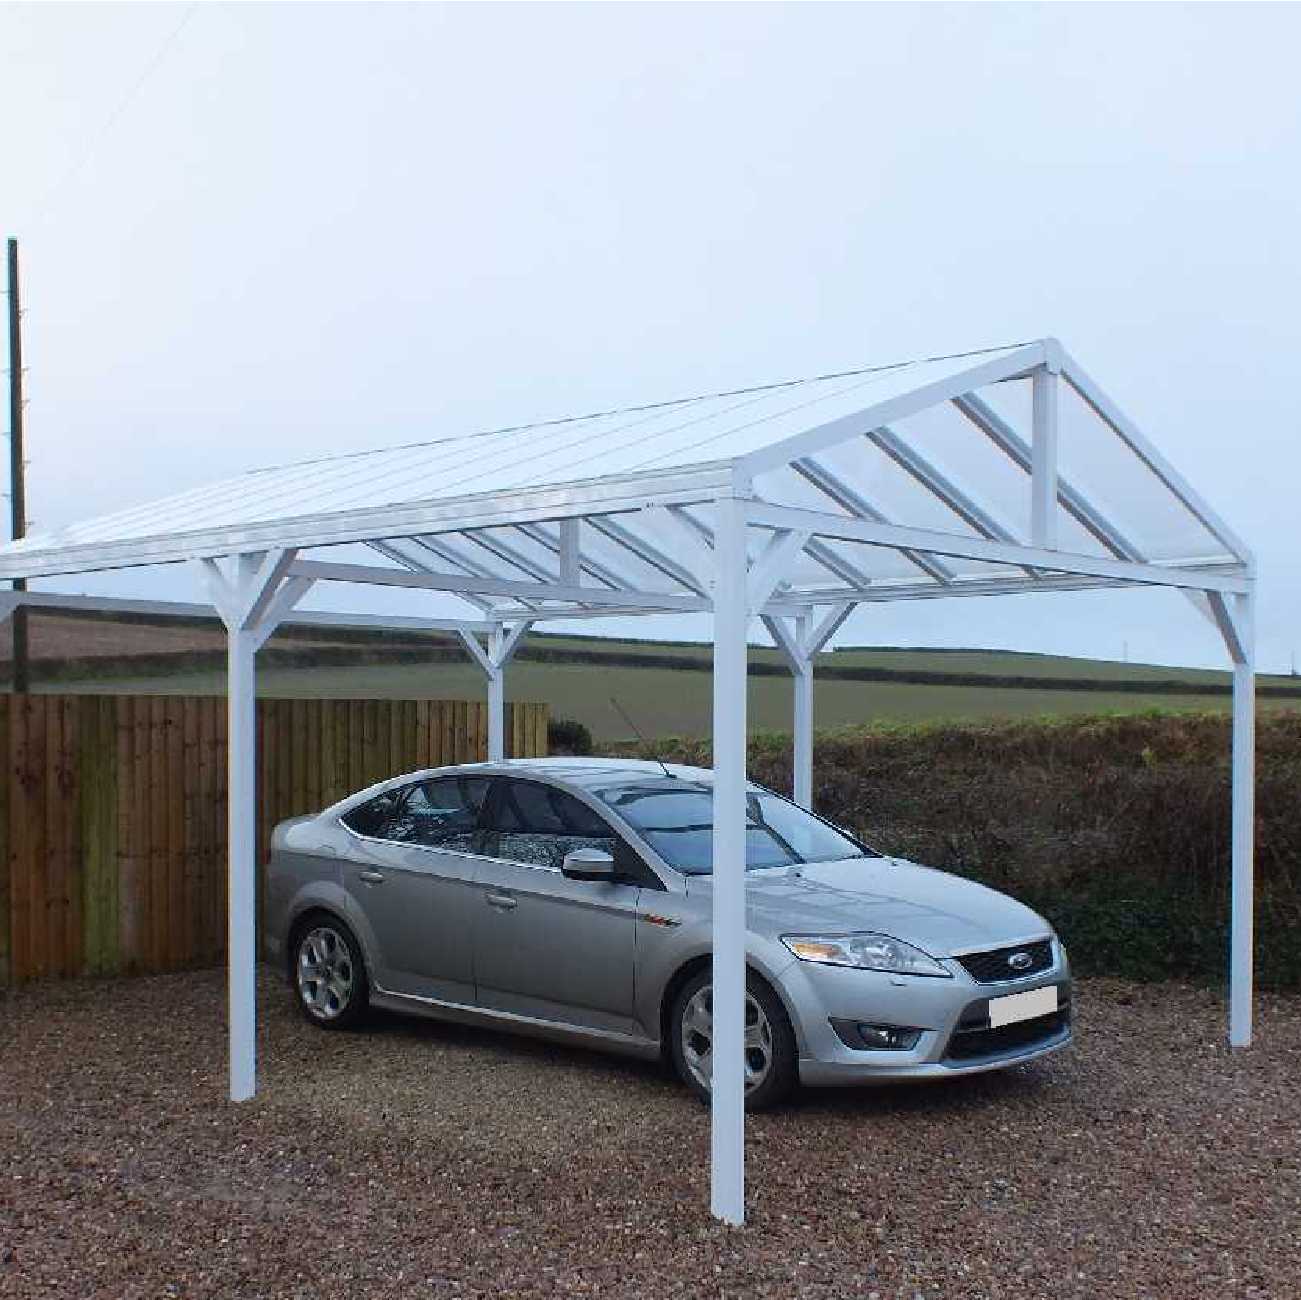 Affordable Omega Smart Free-Standing, White Gable-Roof (type 1) Canopy with 16mm Polycarbonate Glazing - 7.4m (W) x 4.0m (P), (8) Supporting Posts